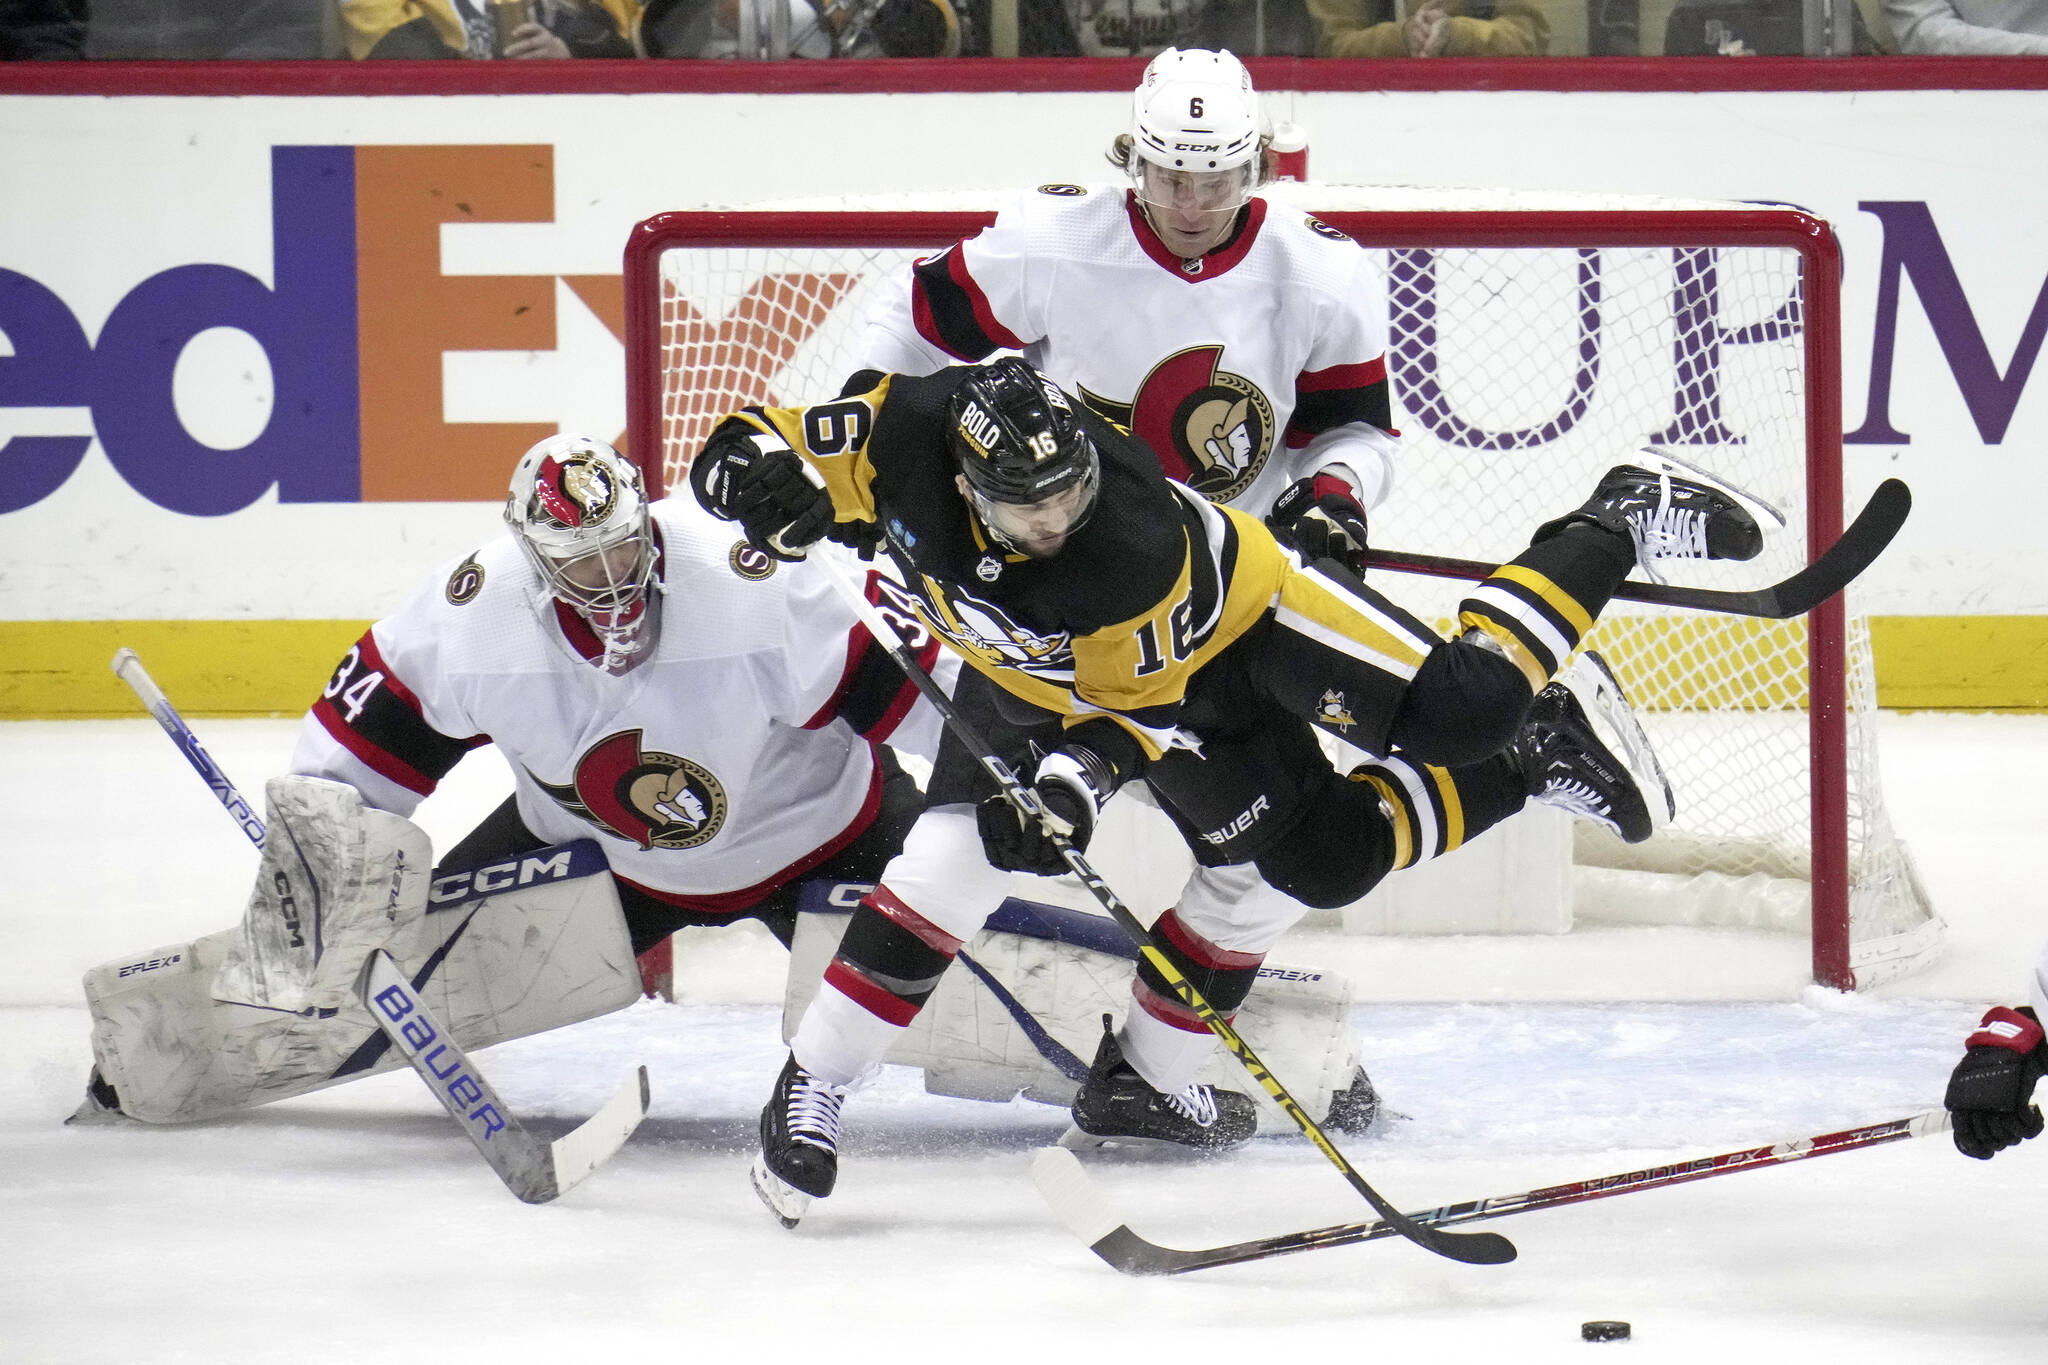 Pittsburgh Penguins’ Jason Zucker (16) is checked to the ice by Ottawa Senators’ Jakob Chychrun (6) in front of goaltender Dylan Ferguson (34) during the first period of an NHL hockey game in Pittsburgh, Monday, March 20, 2023. (AP Photo/Gene J. Puskar)